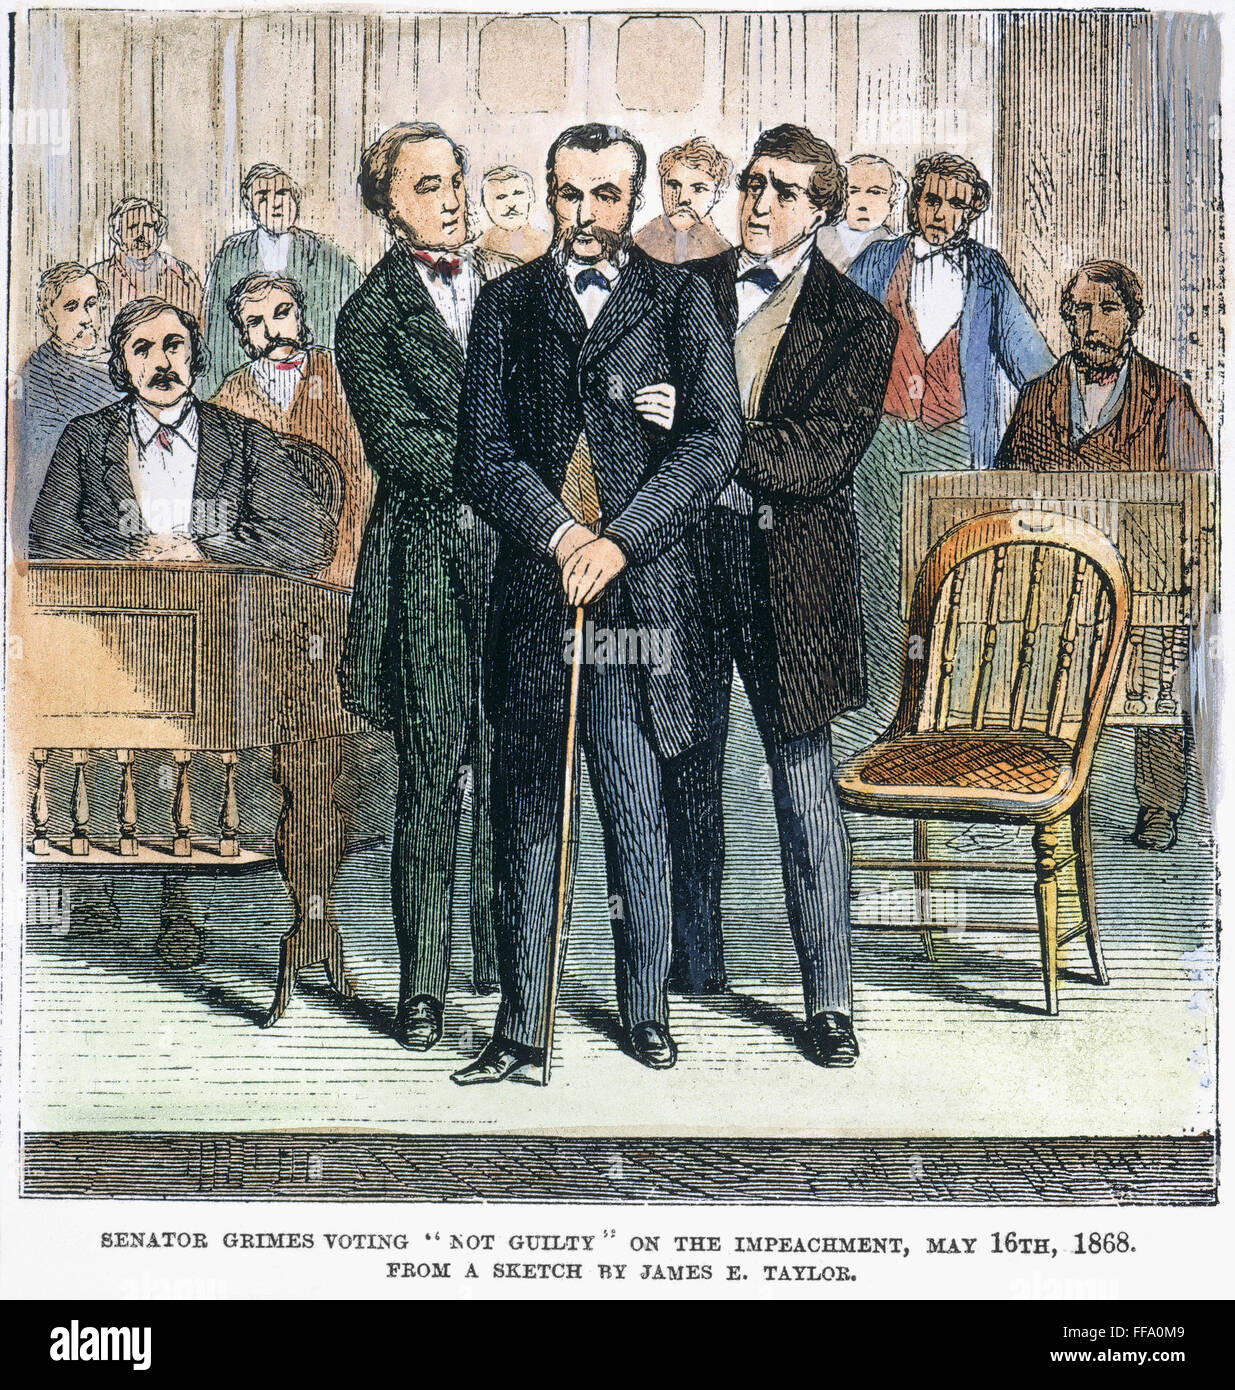 A. JOHNSON: IMPEACHMENT. /nSenator James Wilson Grimes (1816-1872), crippled by a stroke, is carried into the Senate to vote not guilty and prevent the impeachment of President Andrew Johnson, 16 May 1868: wood engraving from a contemporary American newsp Stock Photo